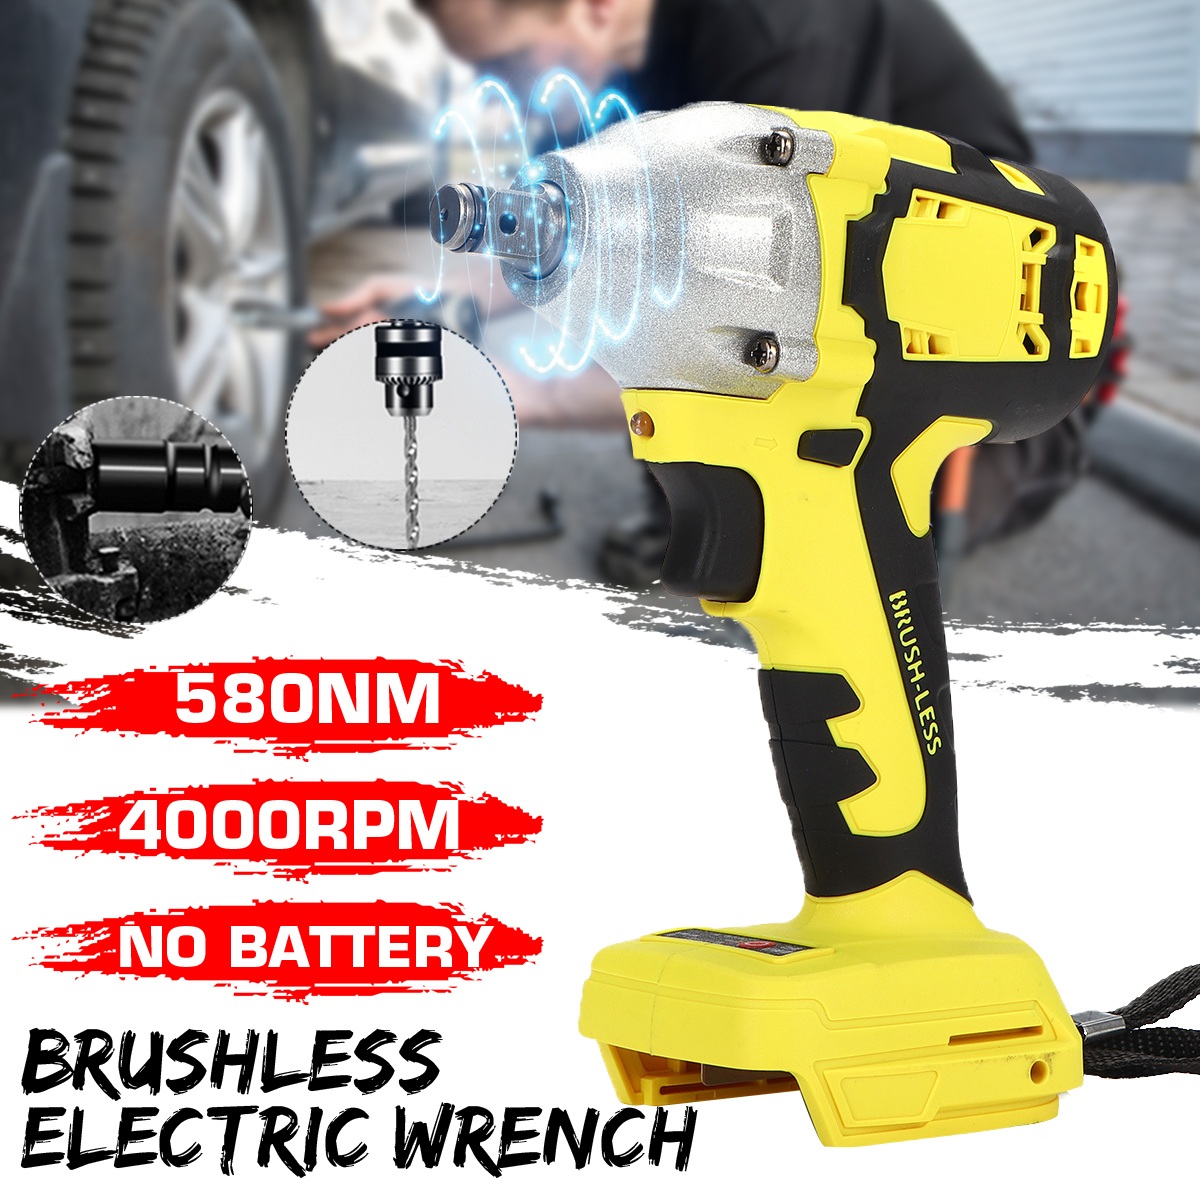 580Nm-4000rpm-LED-Cordless-Motor-Electric-Brushless-Impact-Wrench-for-DIY-General-Building-Engineeri-1610535-1